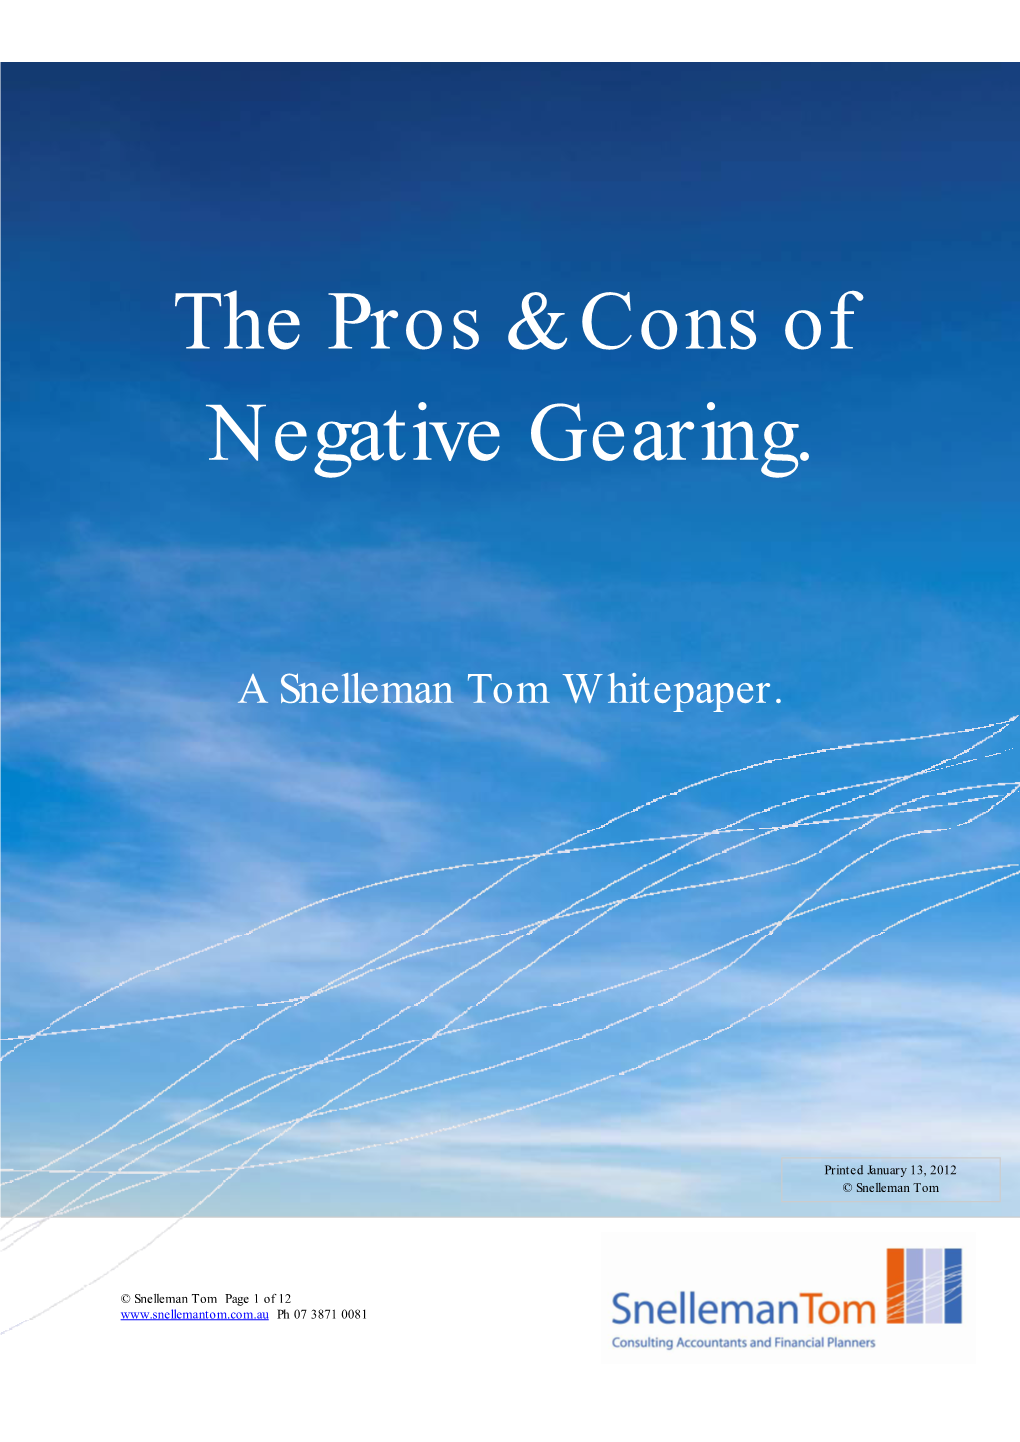 The Pros & Cons of Negative Gearing